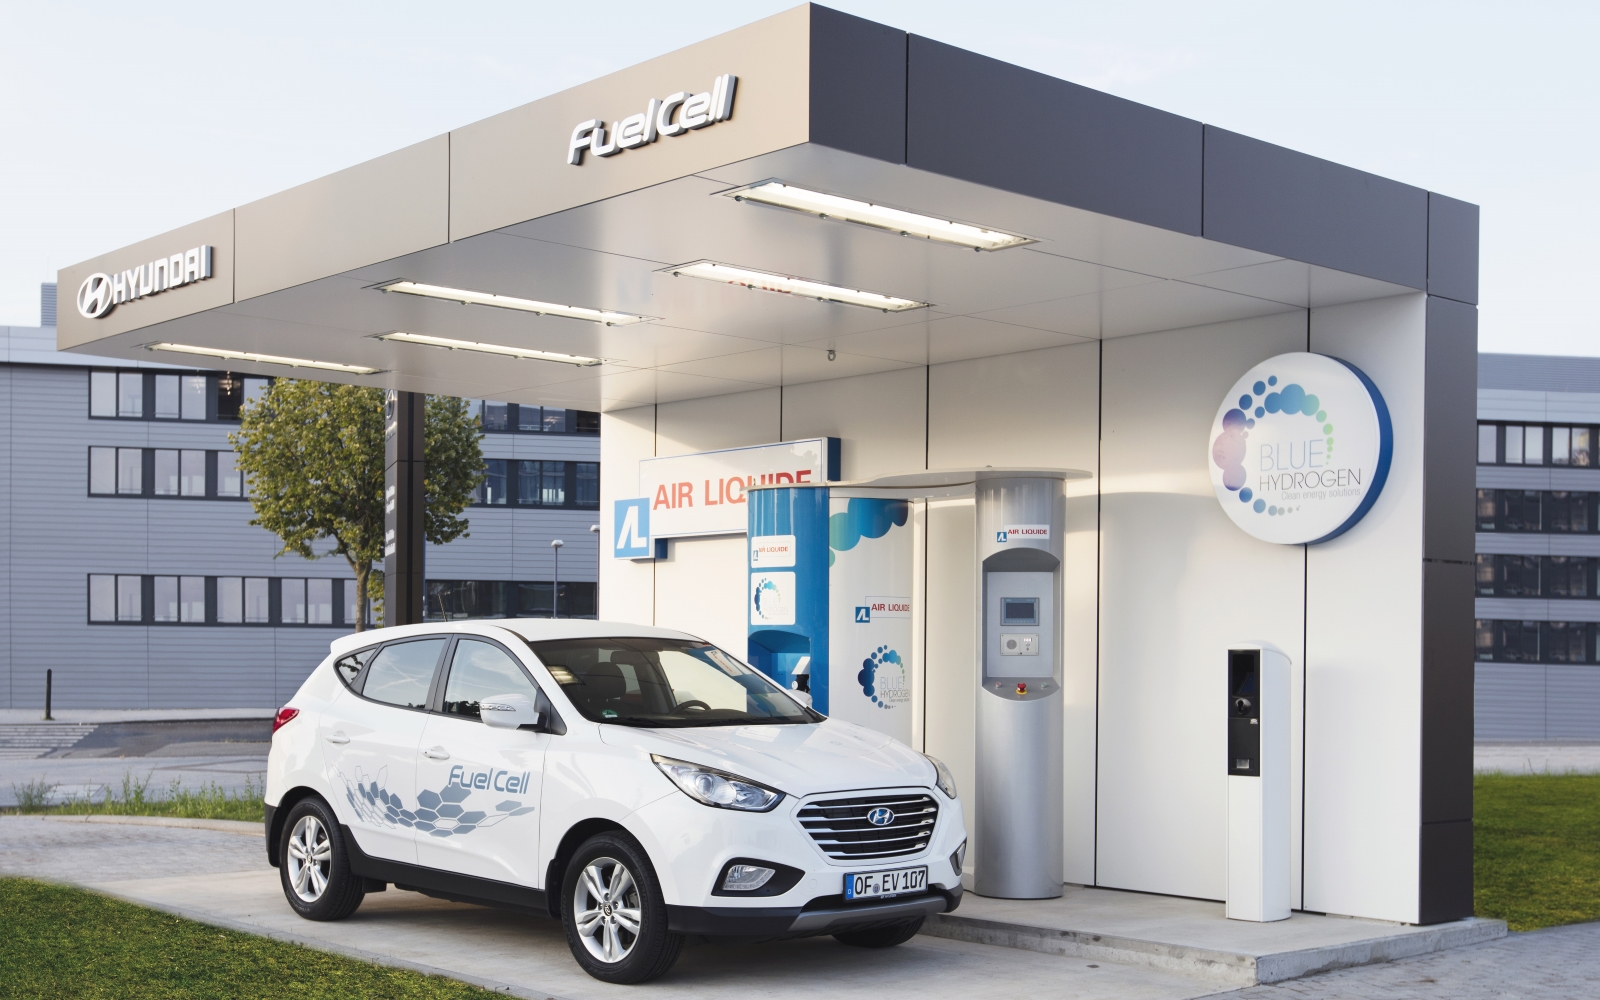 Automotive Majors to Invest USD 10 Billion in Hydrogen Fuel-Cell Technology